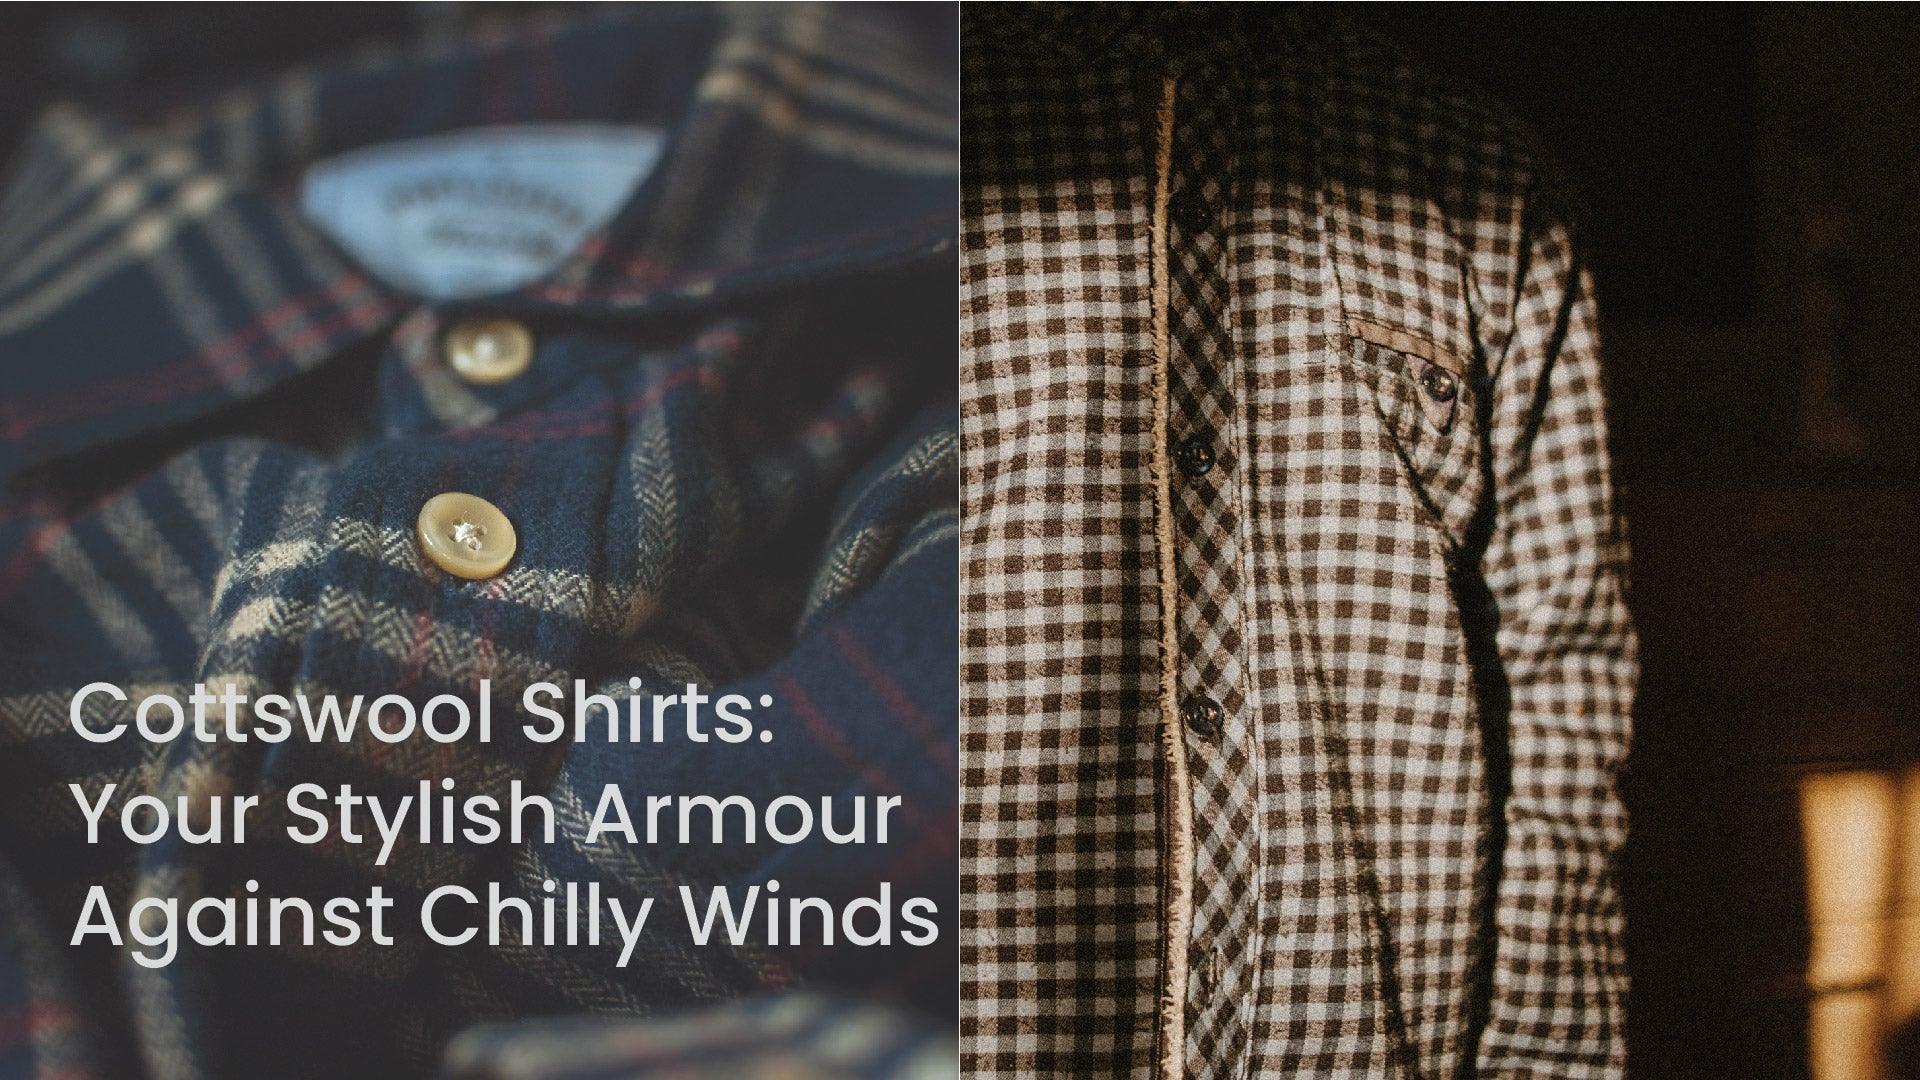 Cottswool Shirts: Your Stylish Armour Against Chilly Winds - GHPC